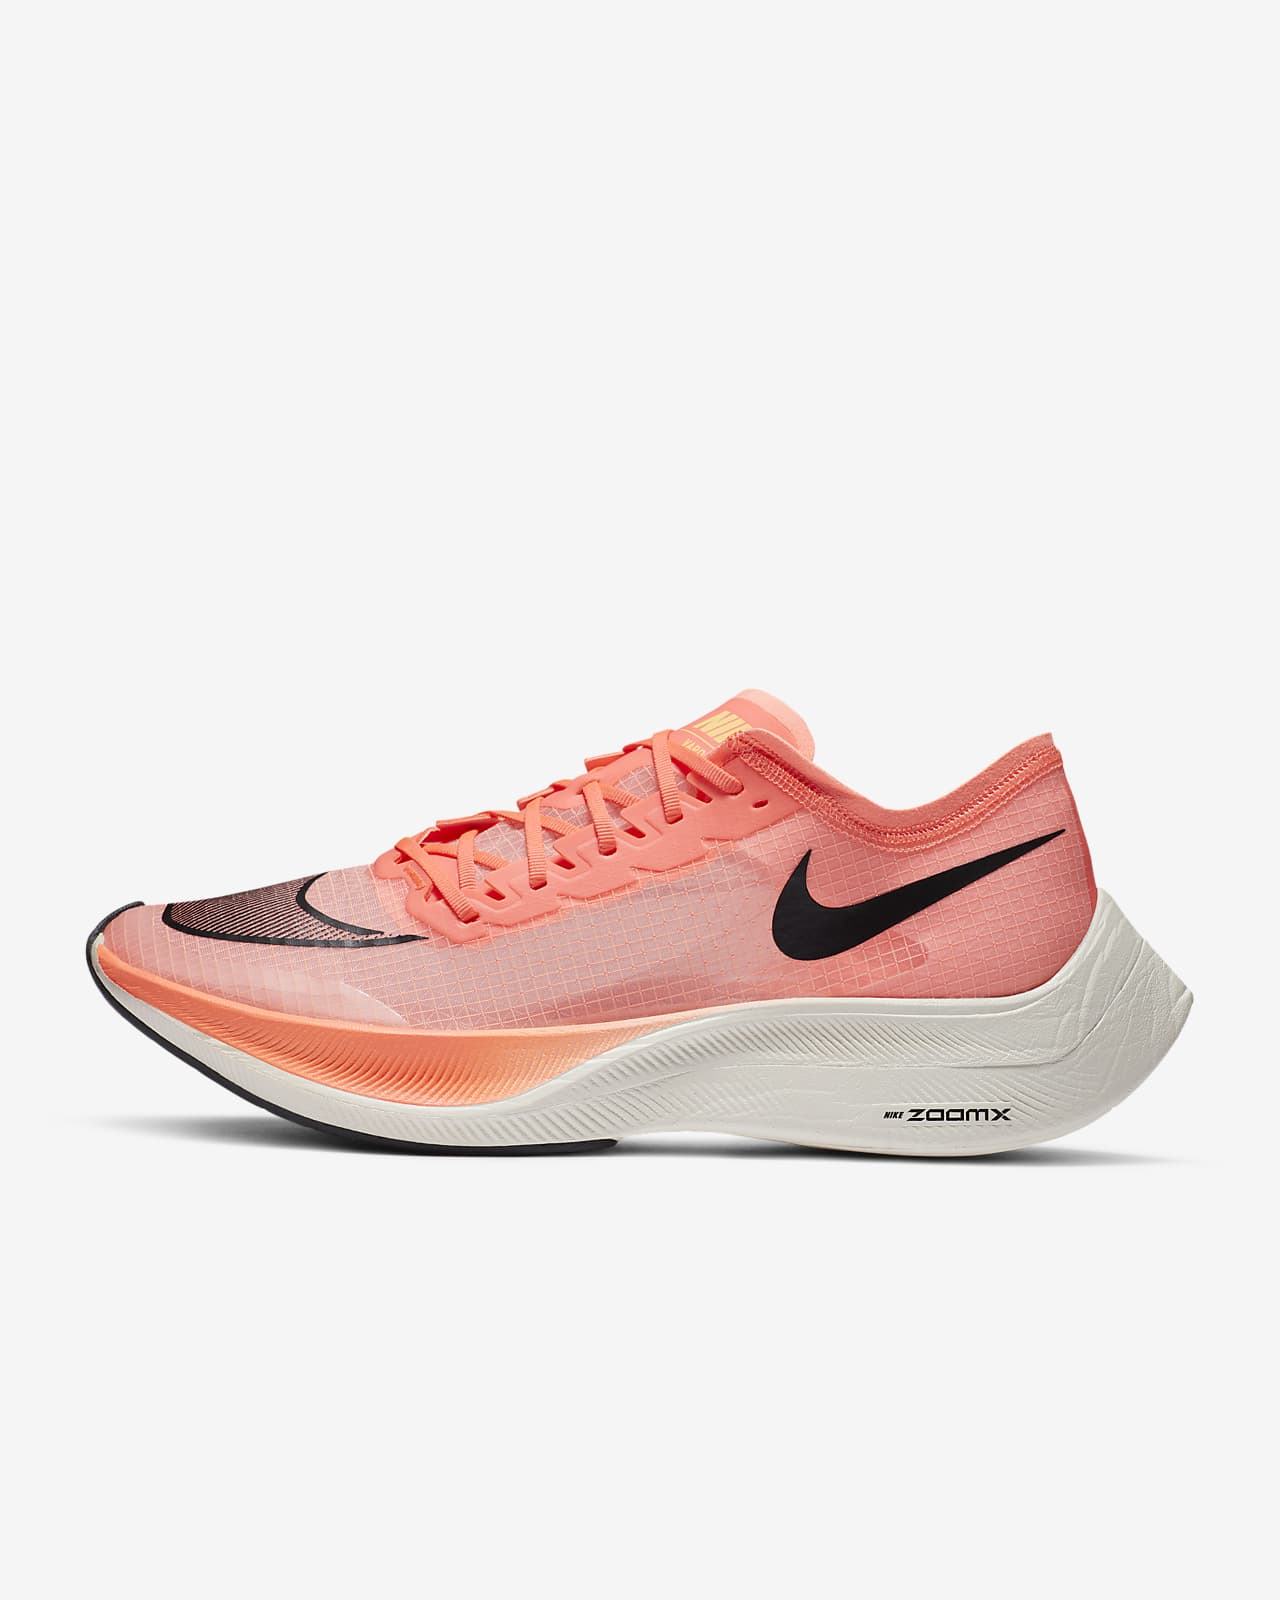 Nike ZoomX Vaporfly NEXT% Road Racing Shoes